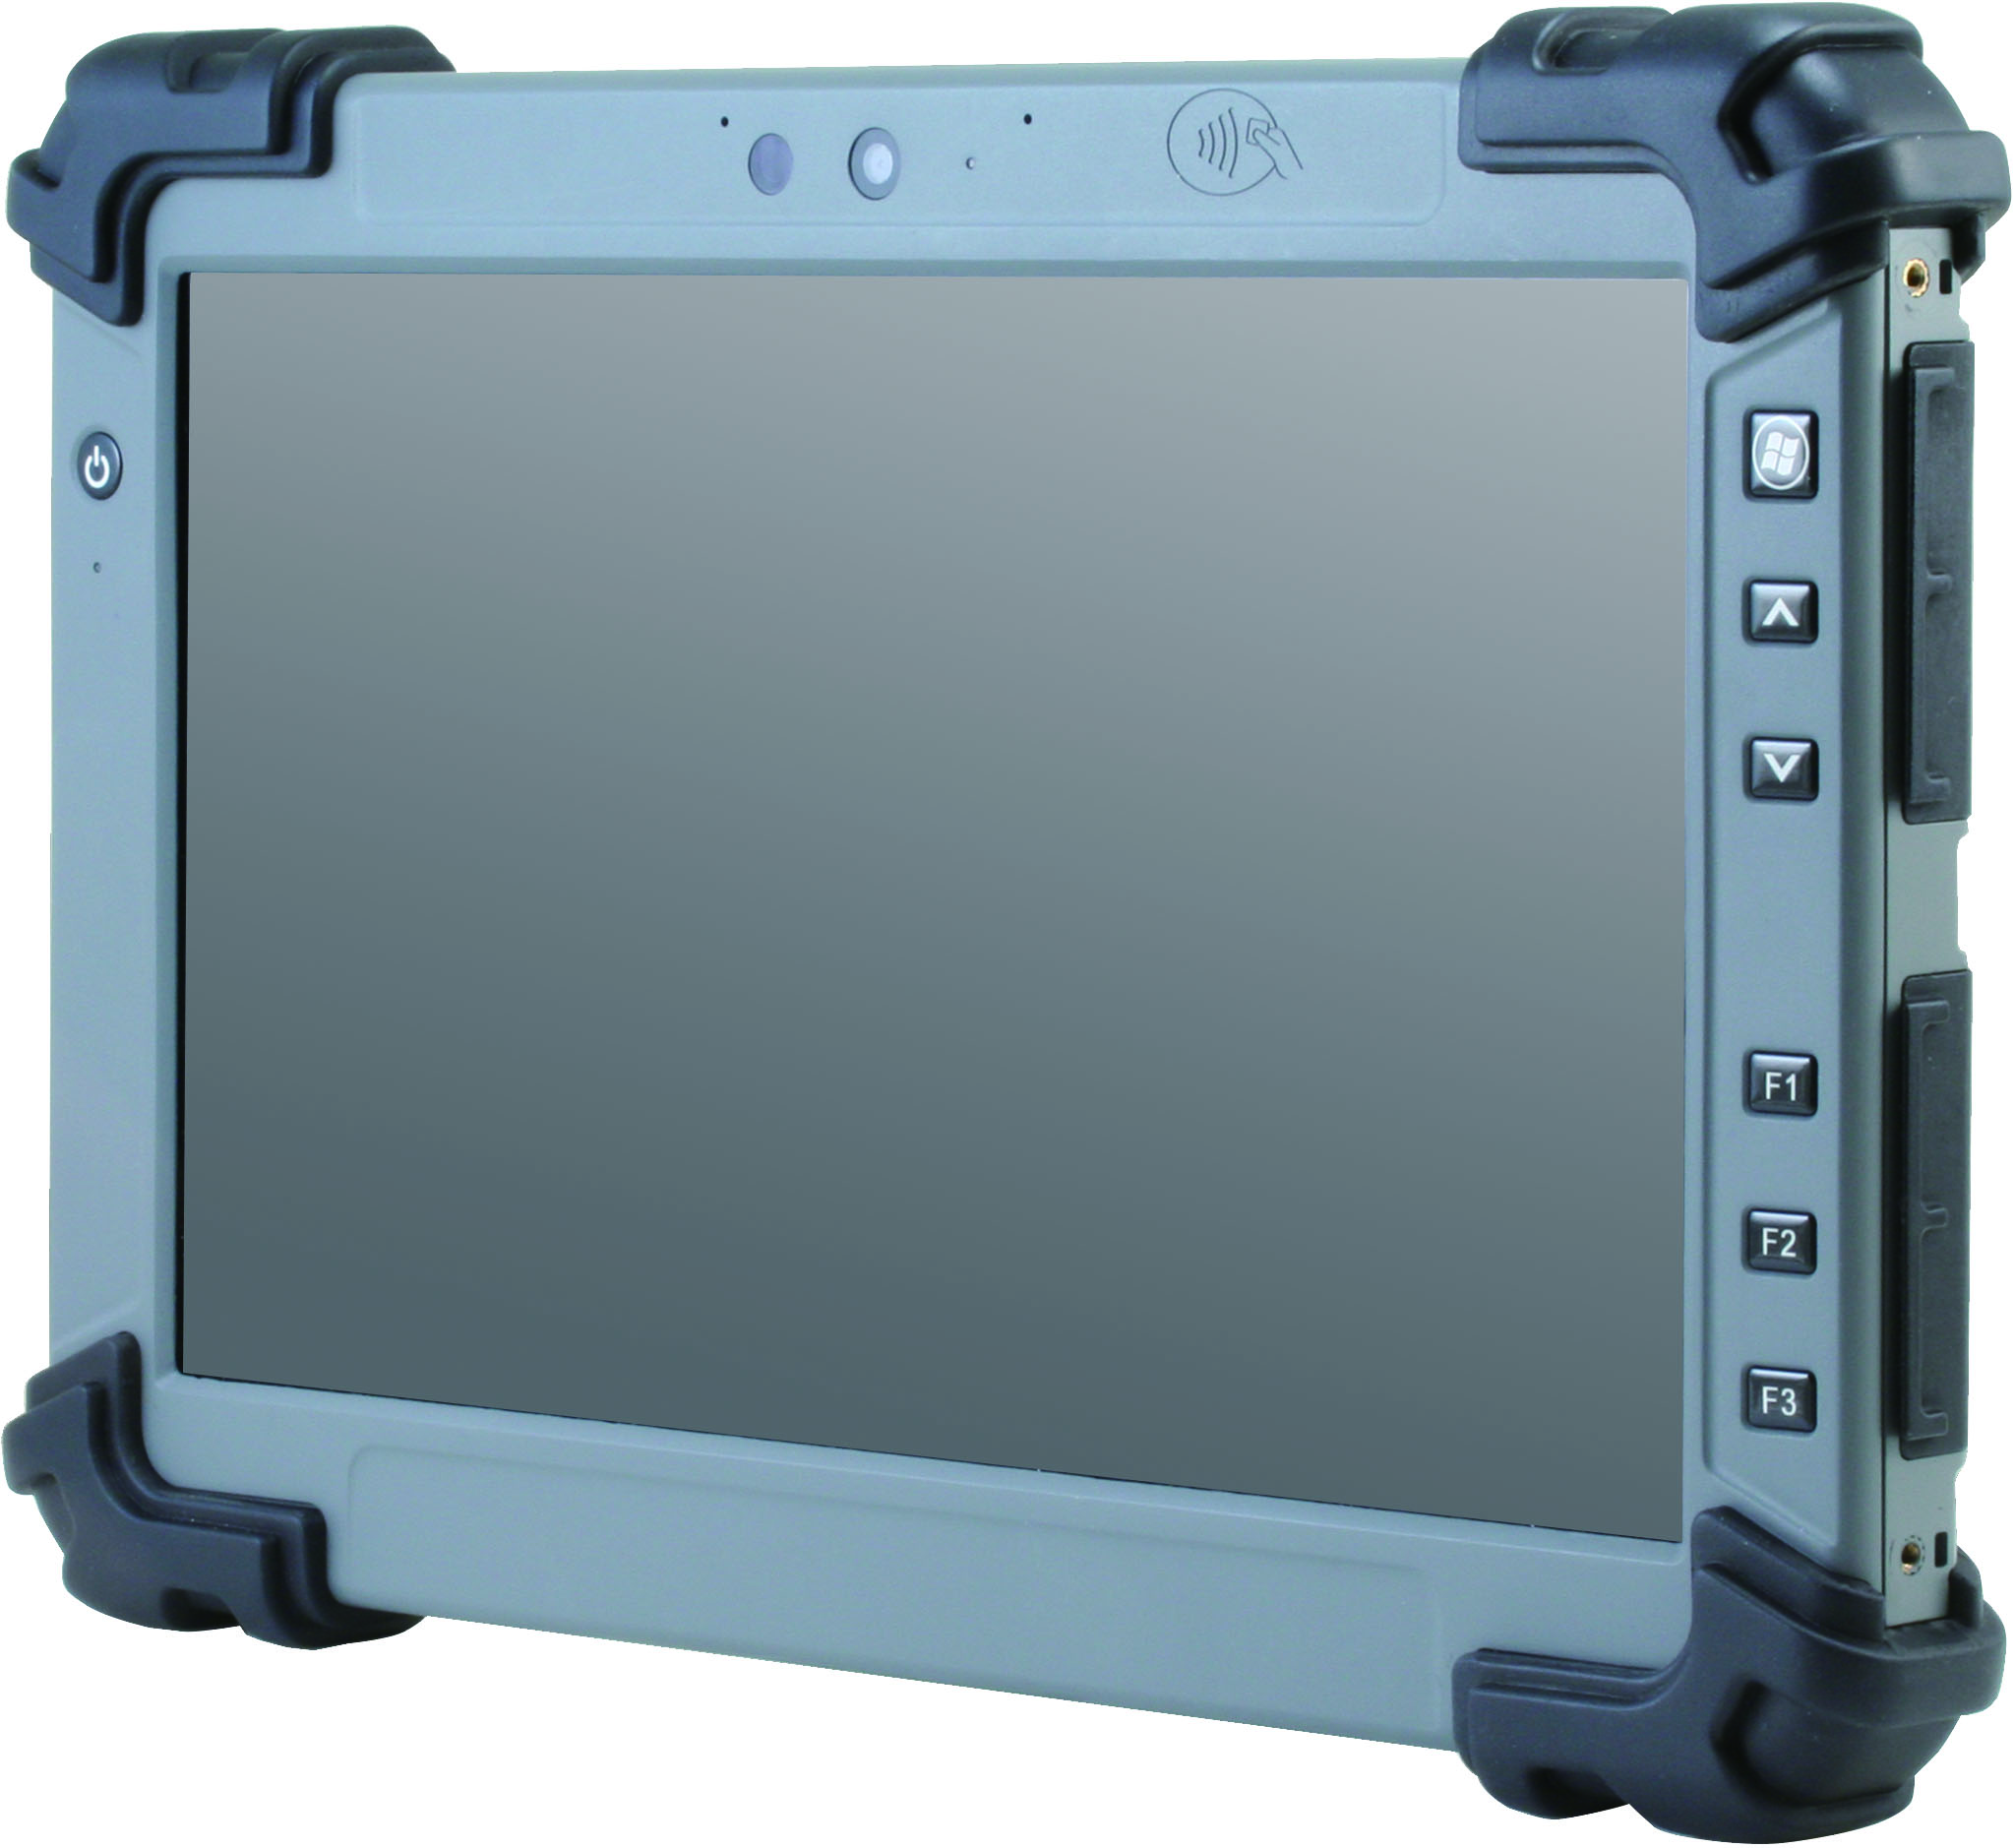 11.6” sunlight readable Rugged tablet 